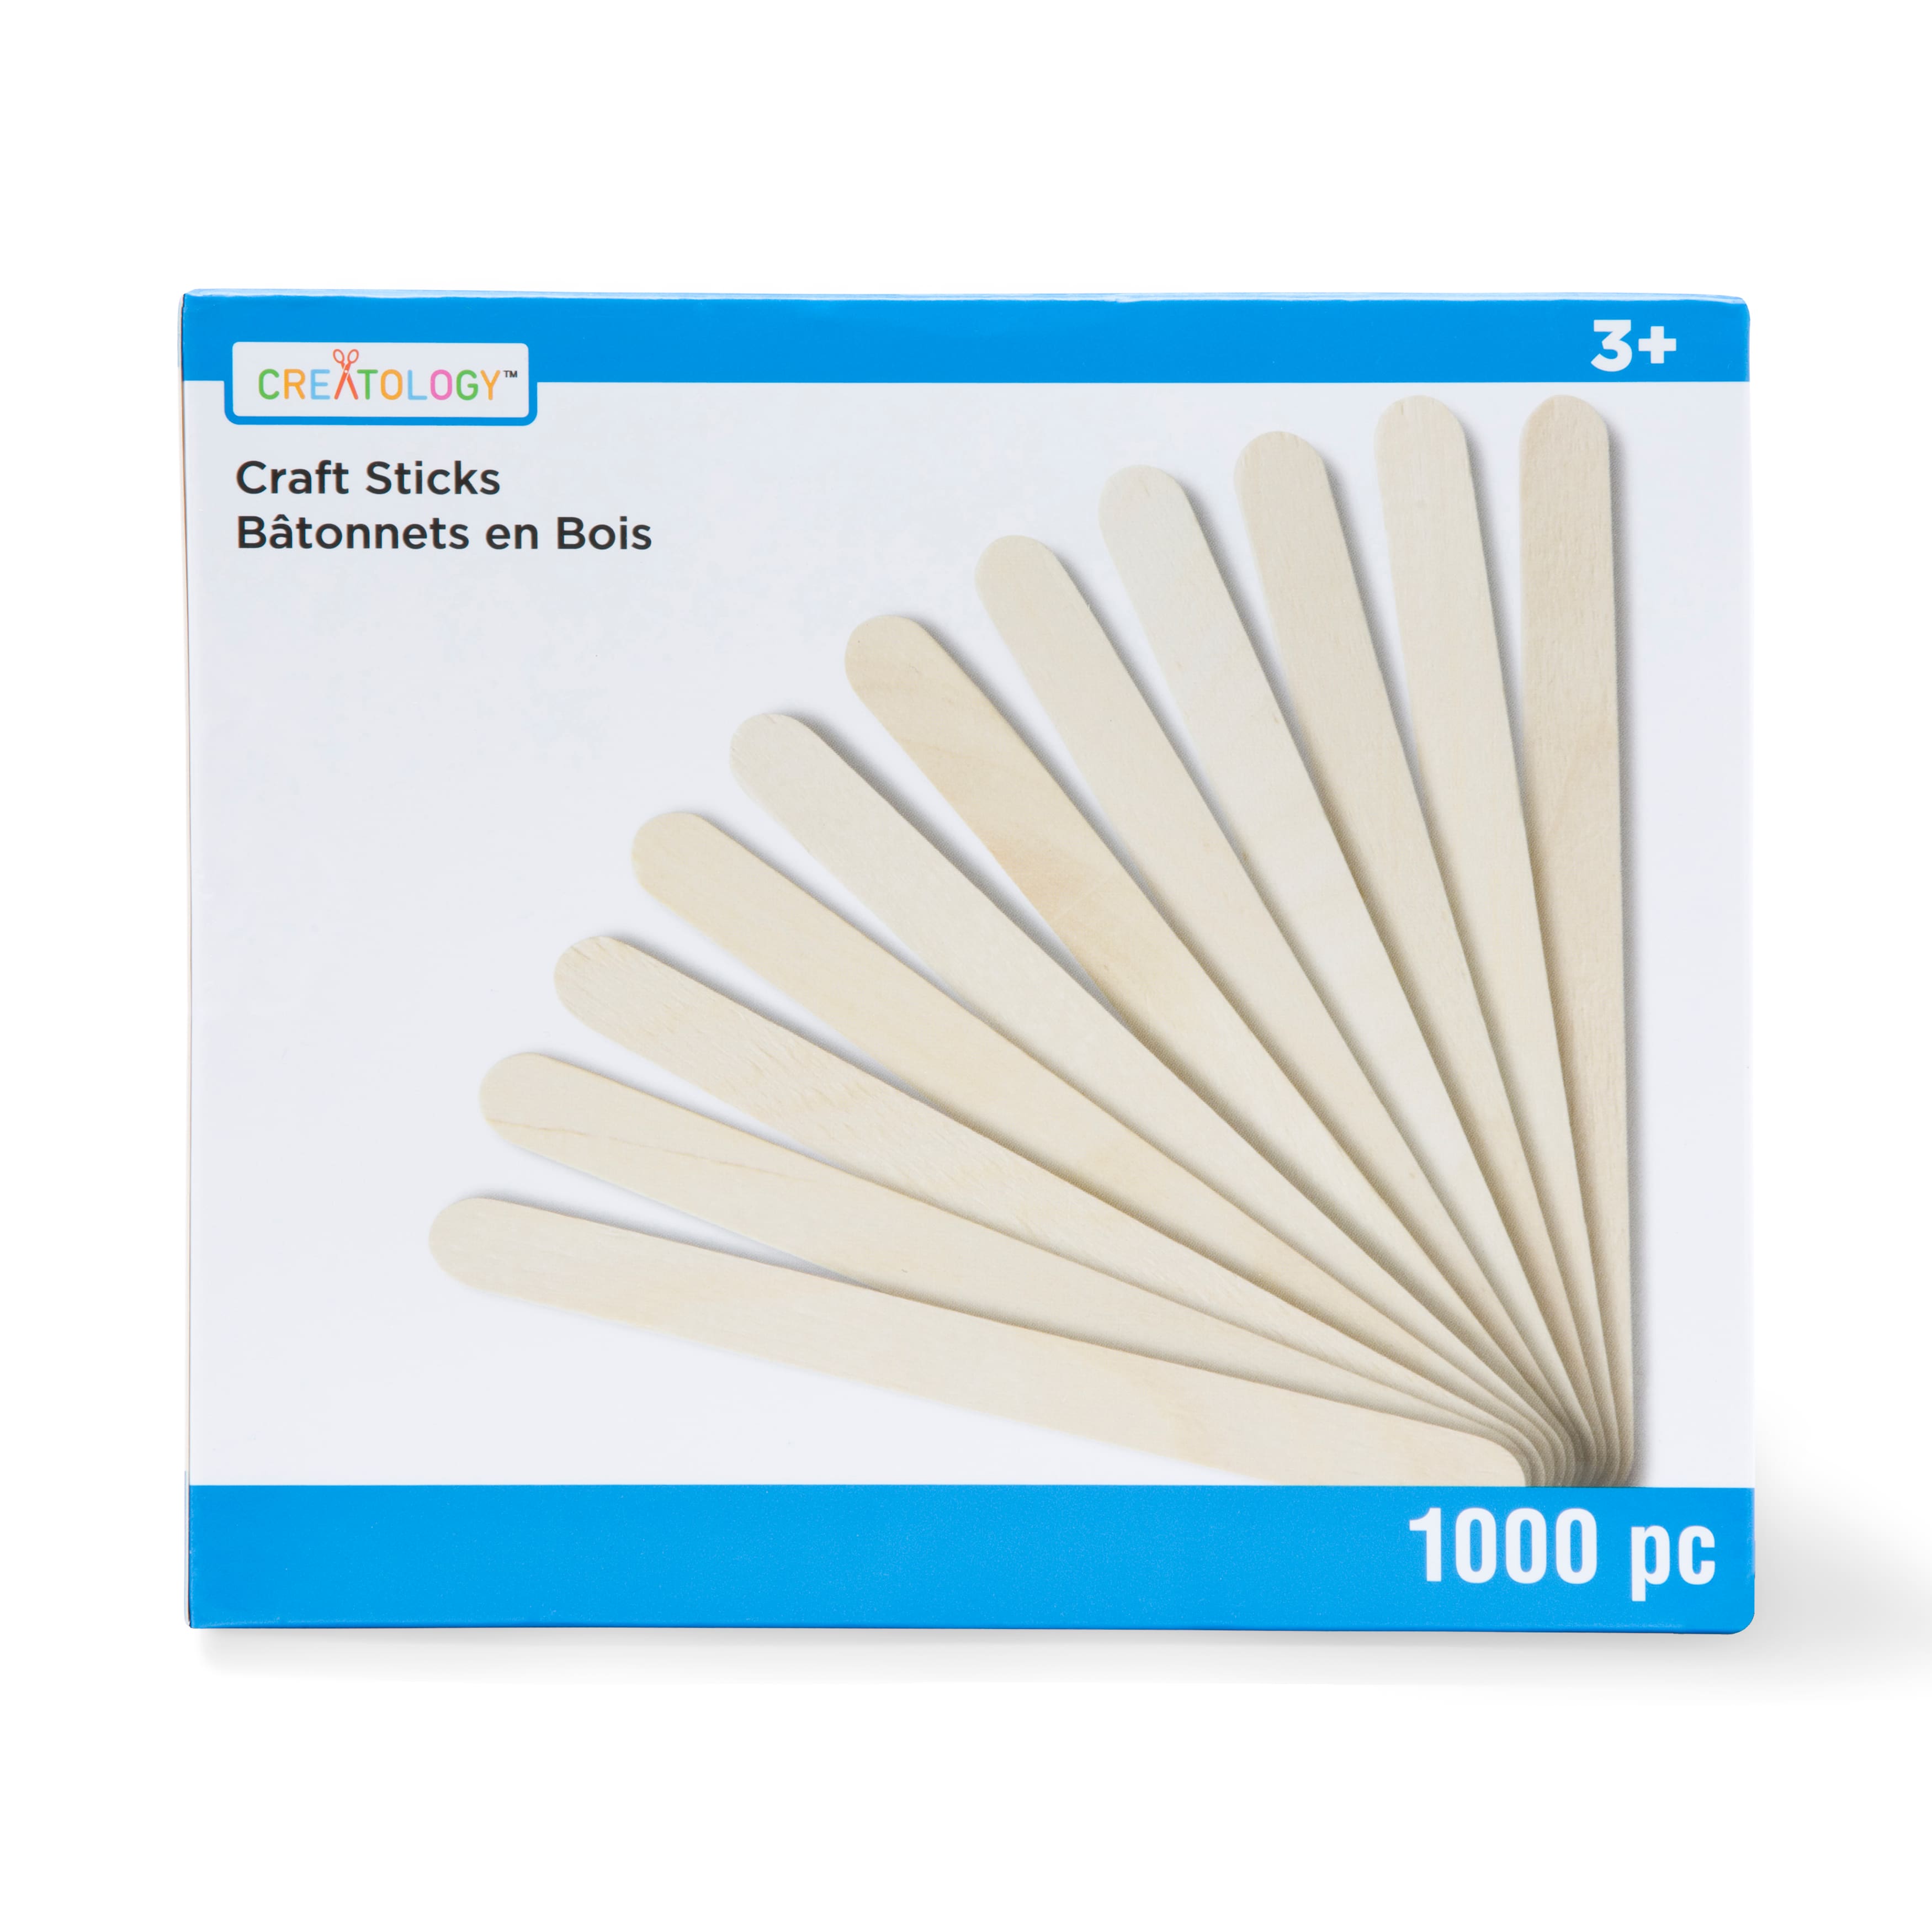 12 Packs: 1,000 ct. (12,000 total) 4.5 Wood Craft Sticks by